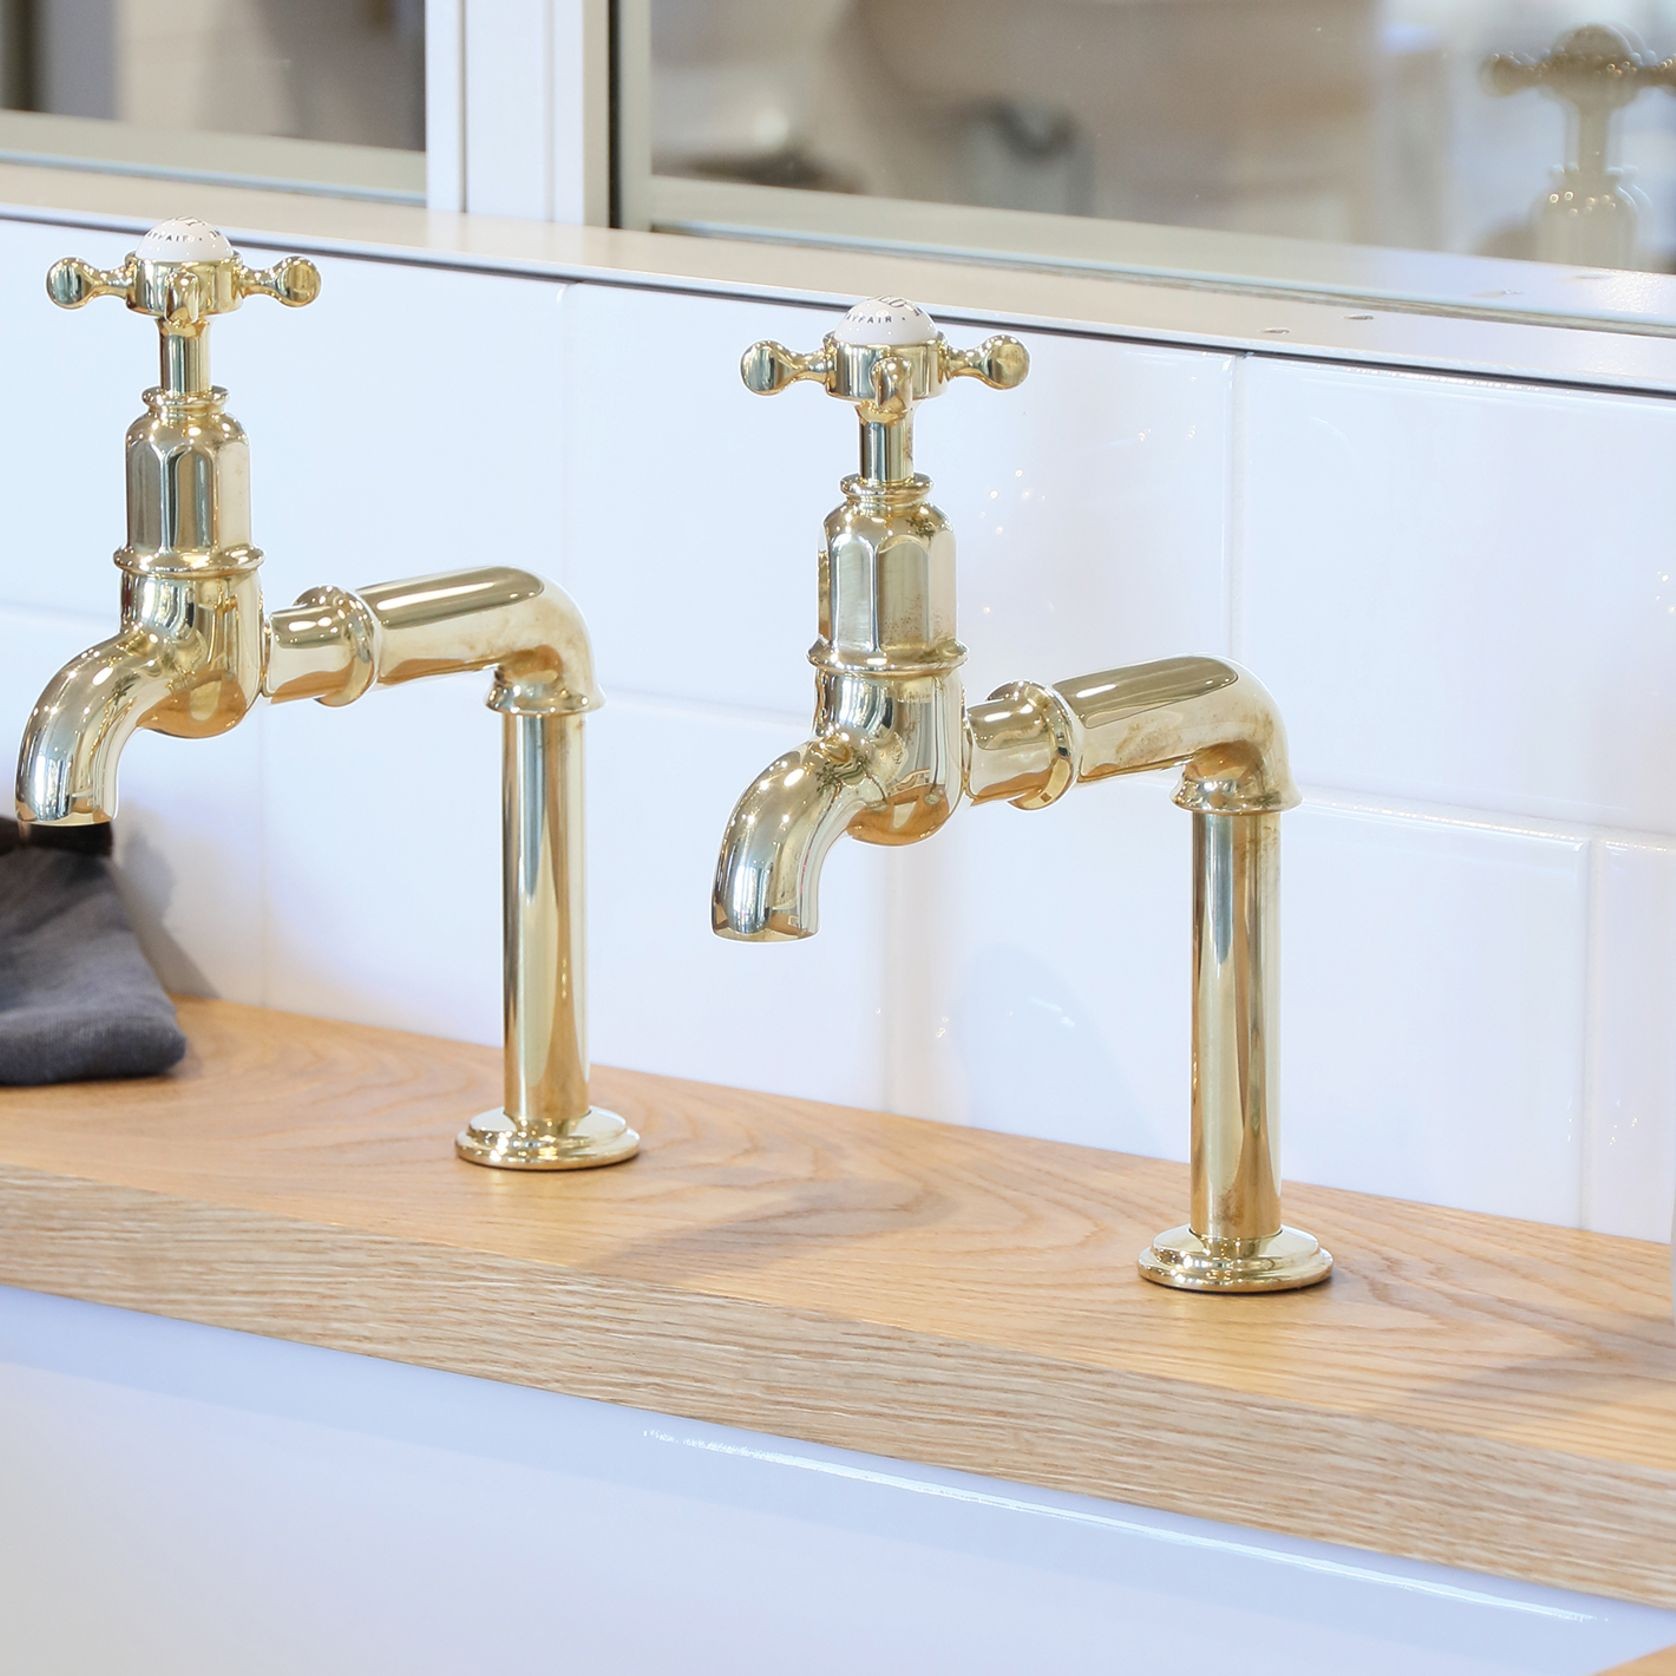 Perrin & Rowe Mayan bibcock kitchen taps with levers gallery detail image